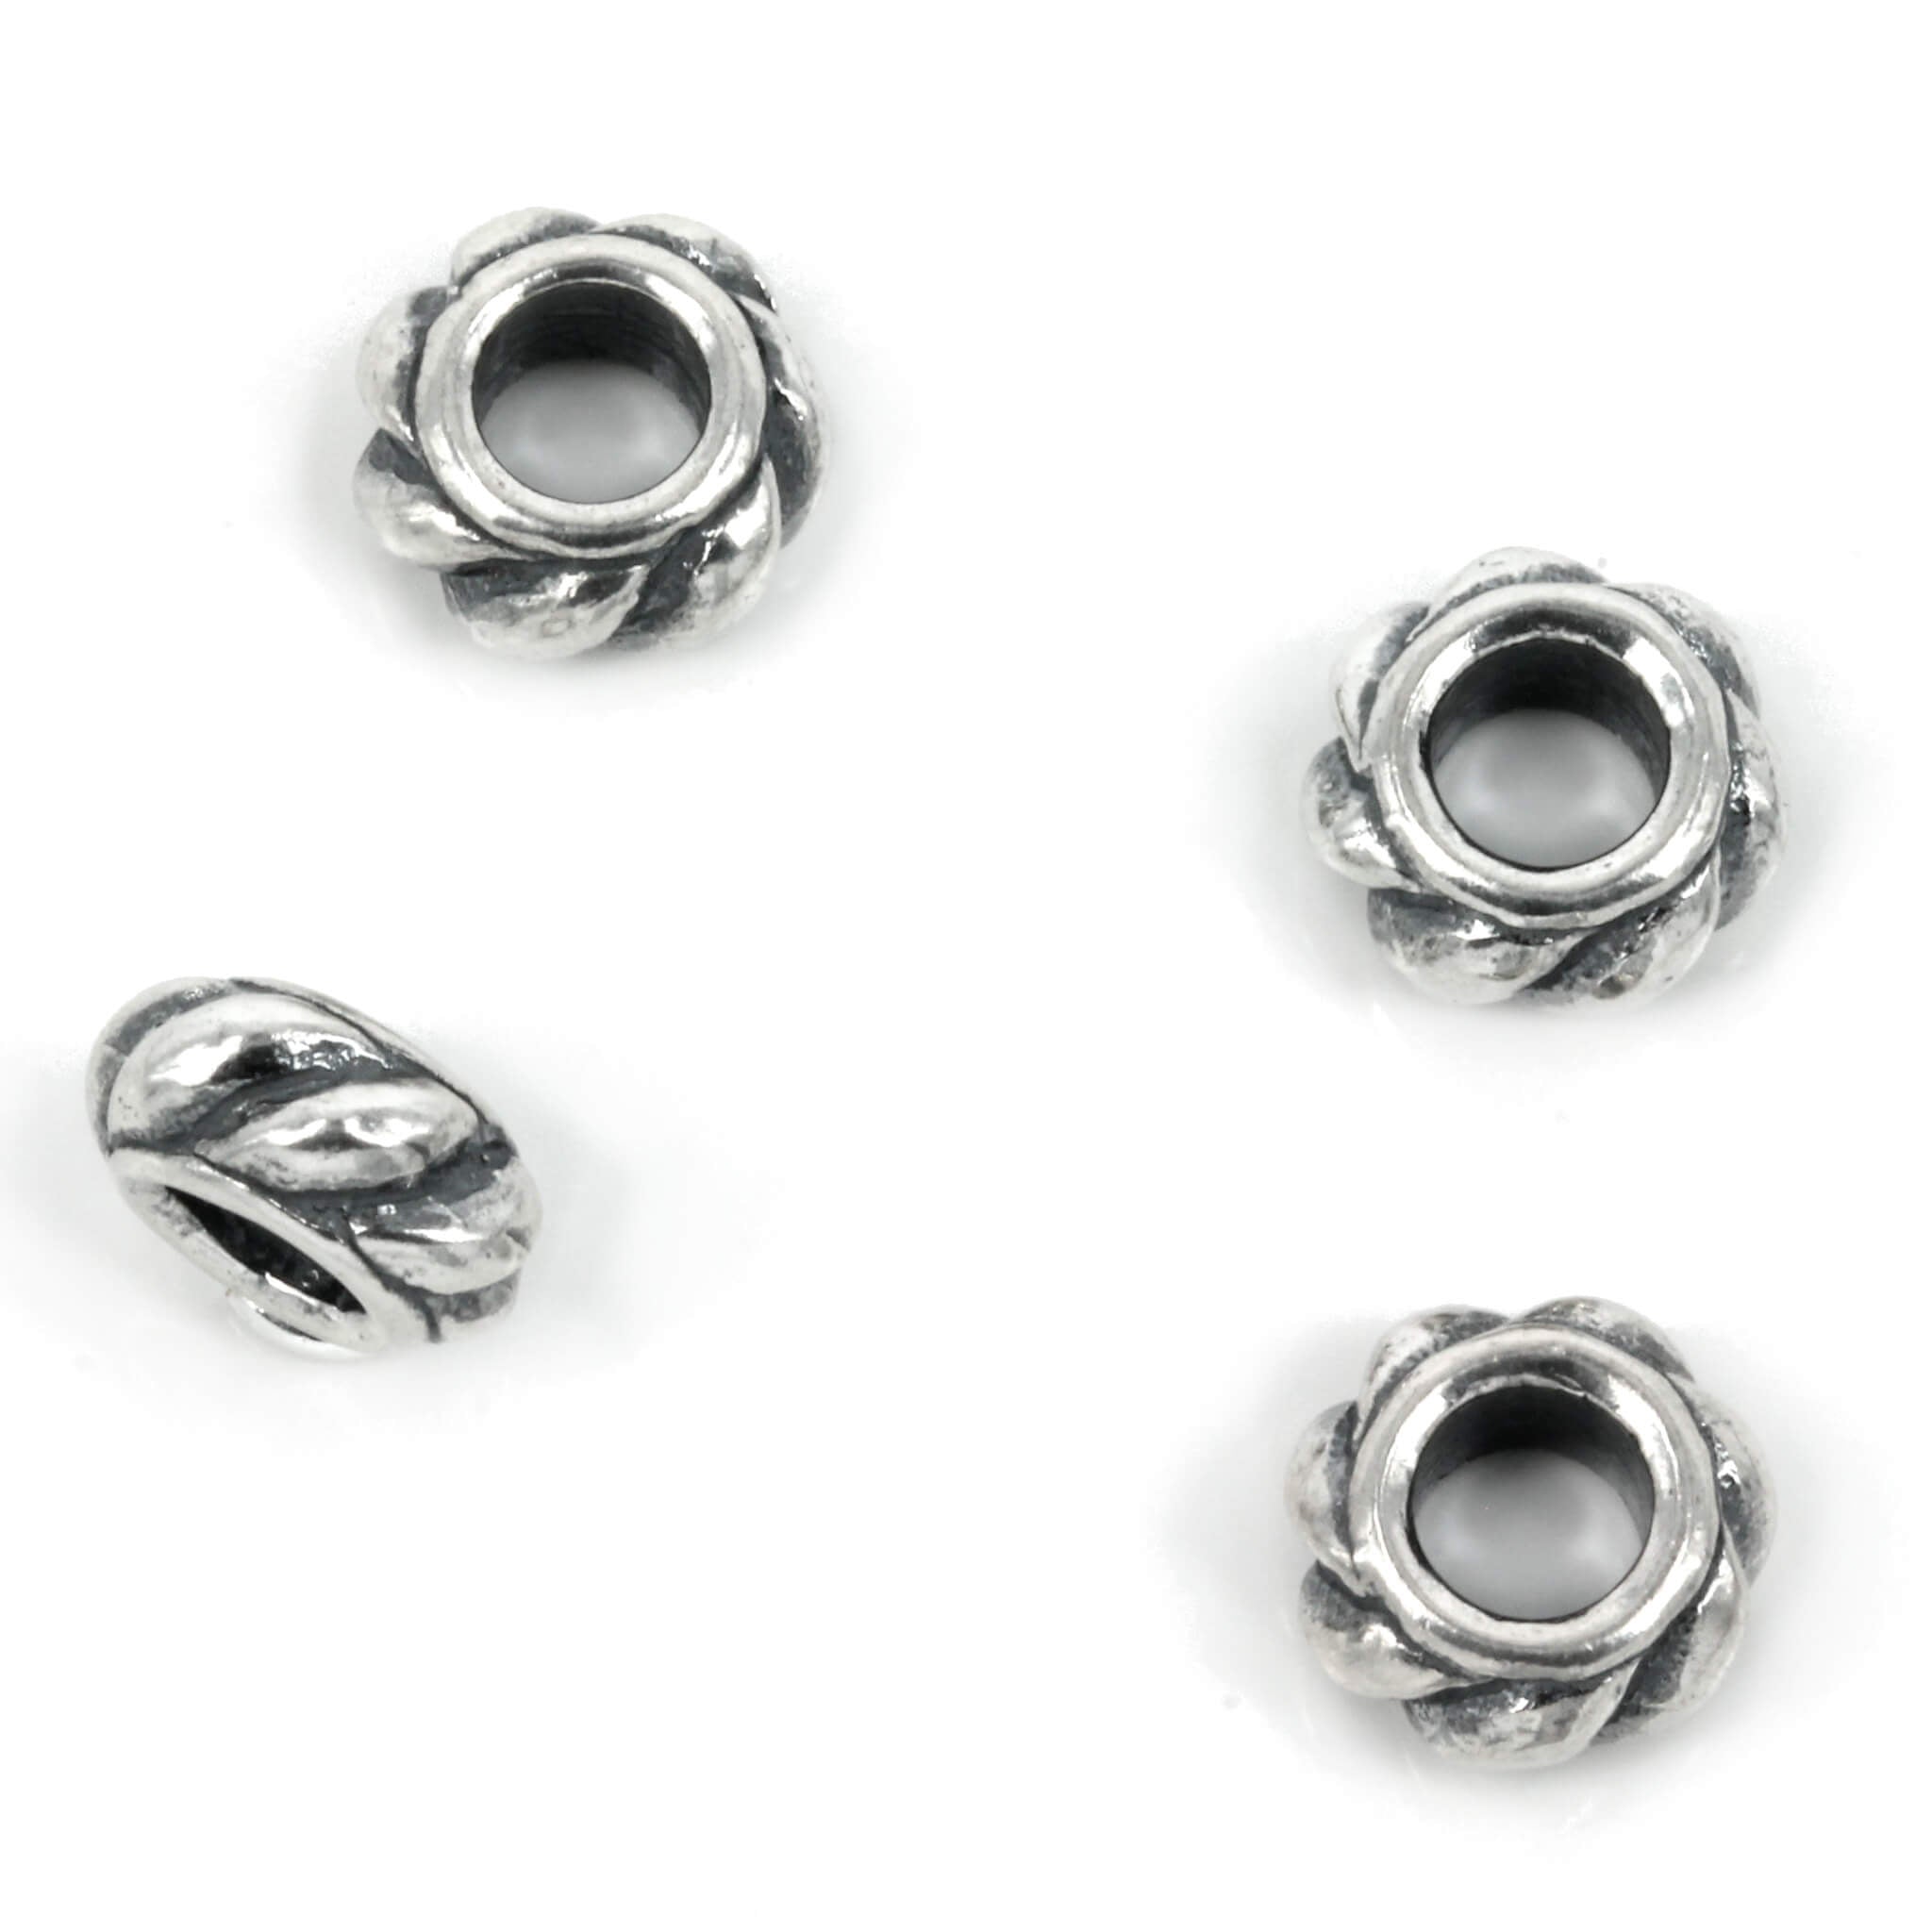 Twisted Corrugated Spacer Bead in Sterling Silver 9x5mm